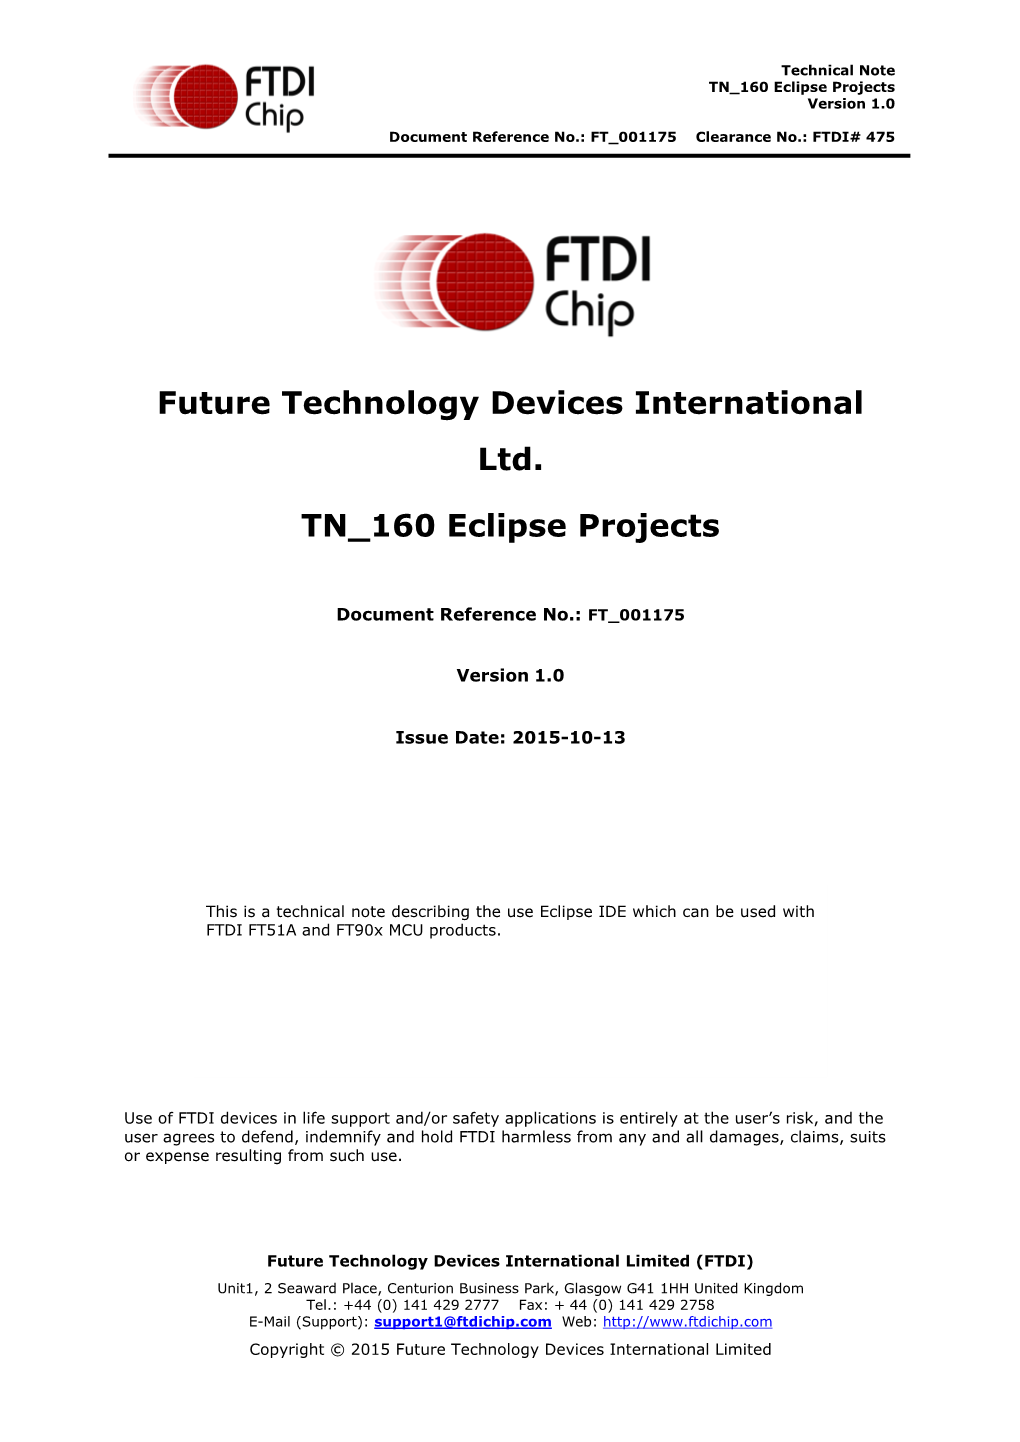 TN 160 Eclipse Projects Version 1.0